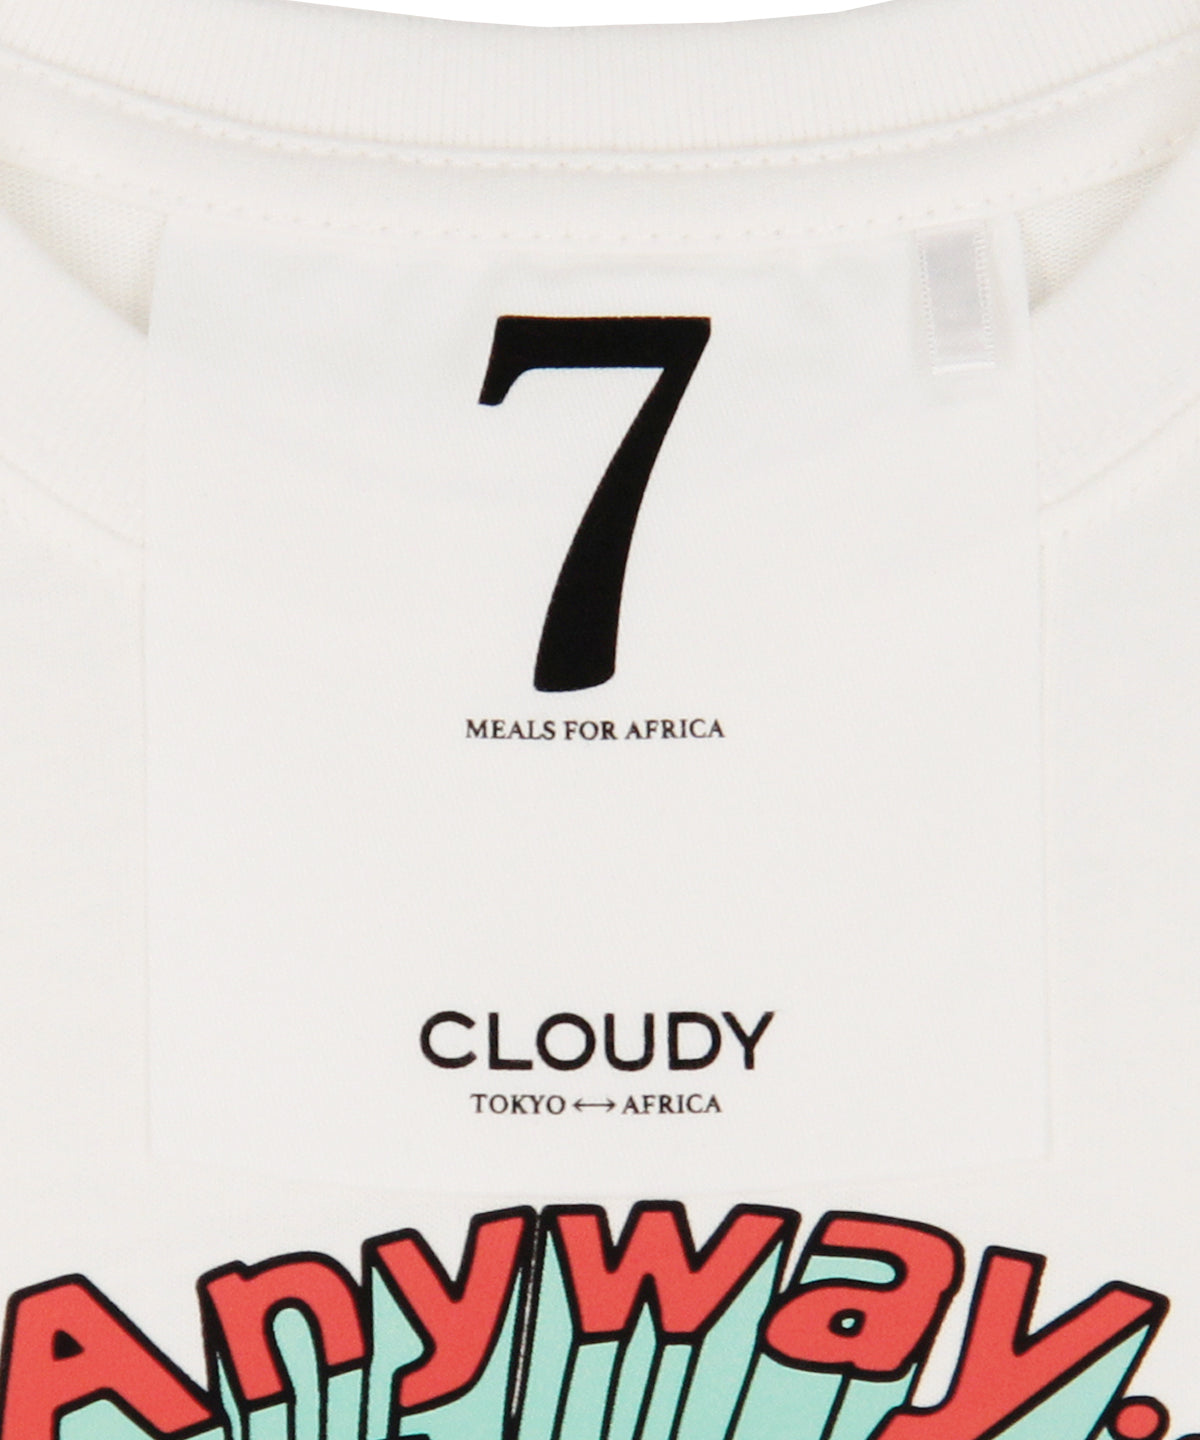 Kids Lunch T-shirt It's CLOUDY DAY  WHITE